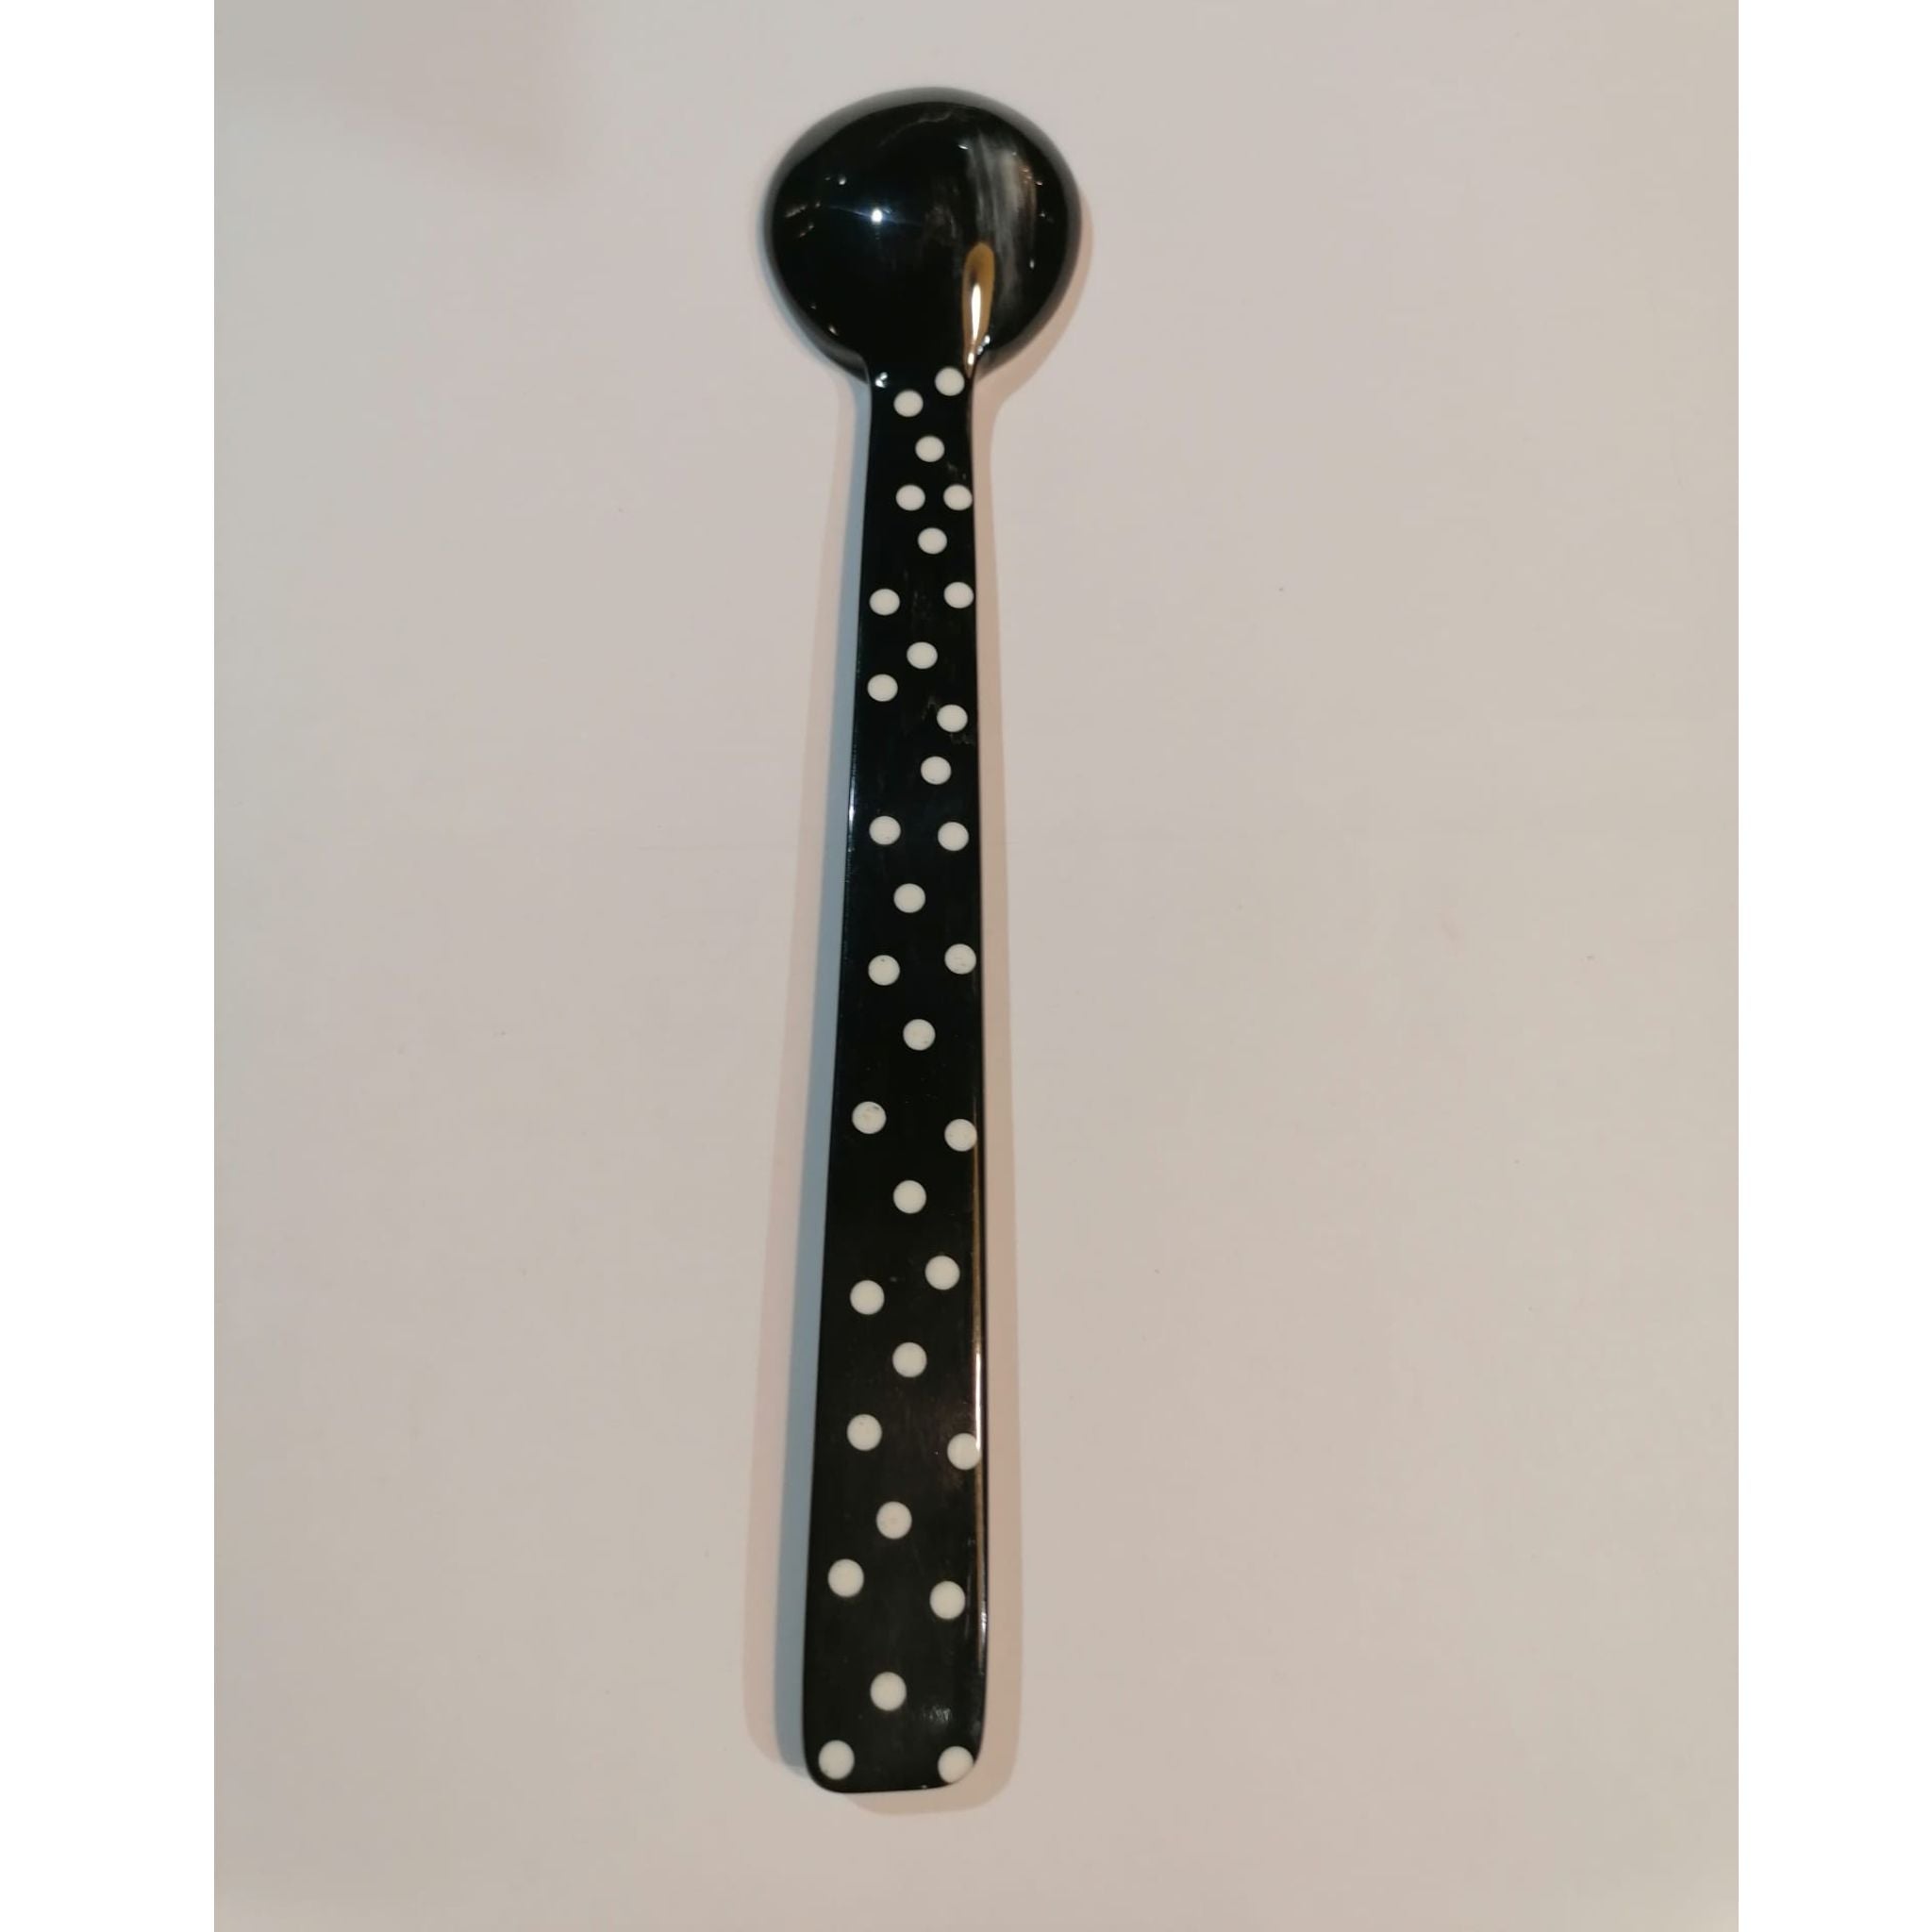 Spoon 18cm Polka Dot view of back on table 